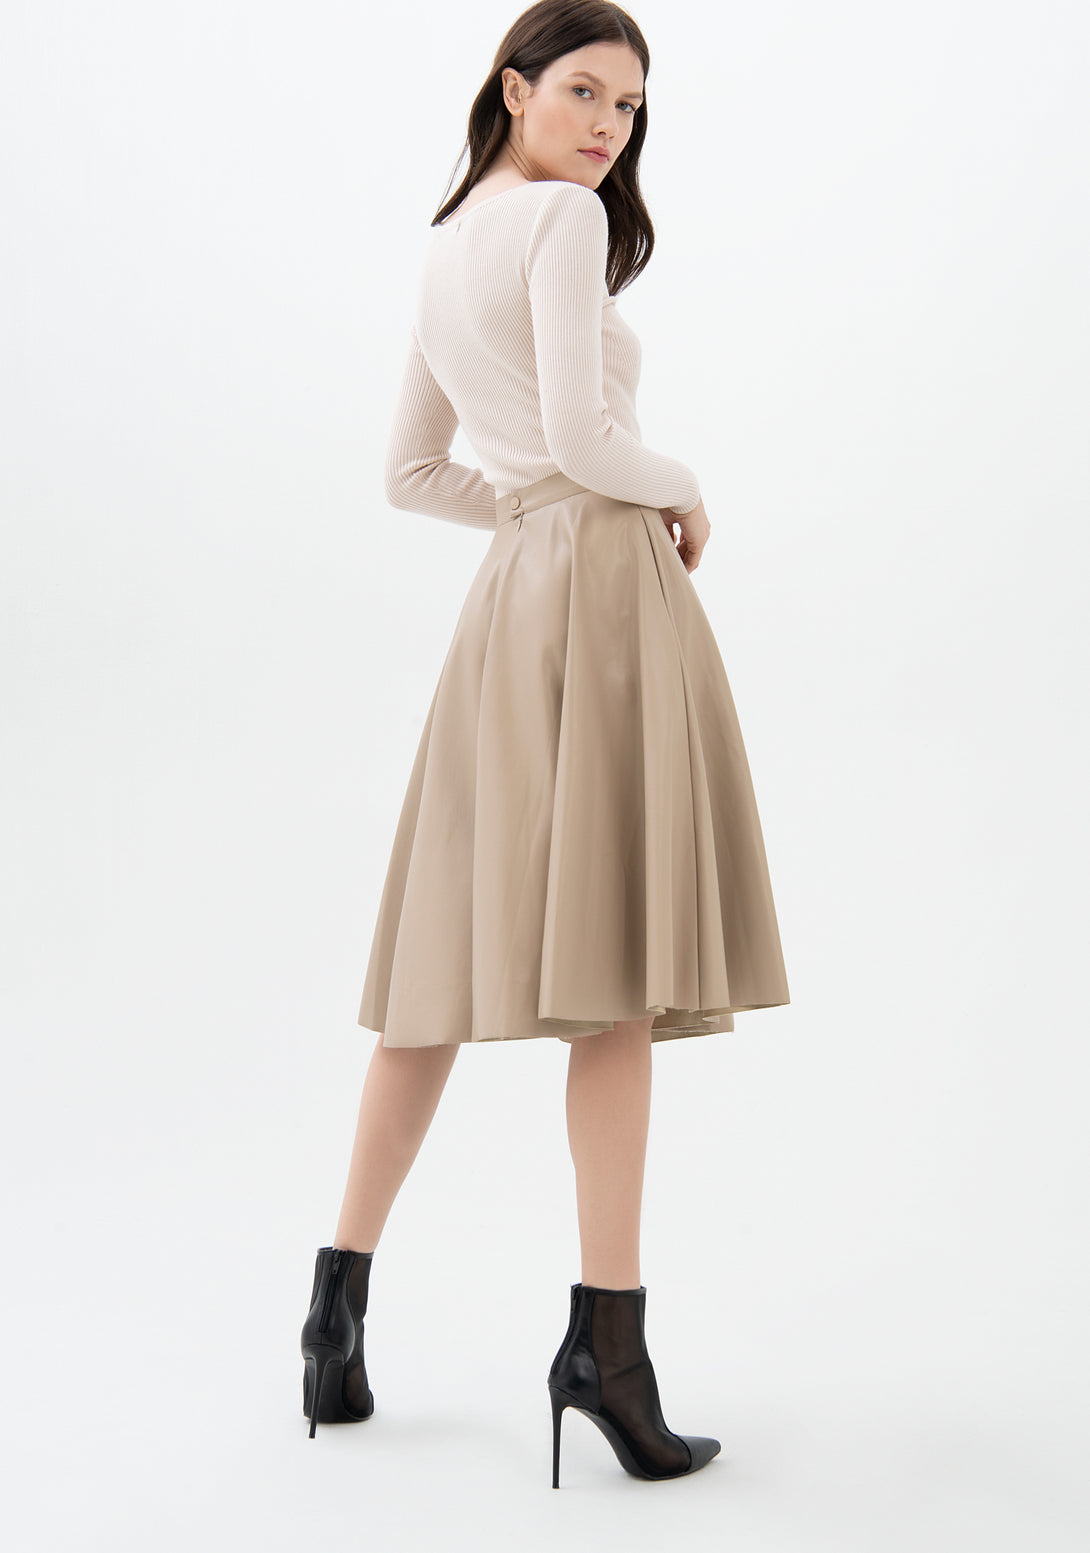 Flare full skirt made in eco leather